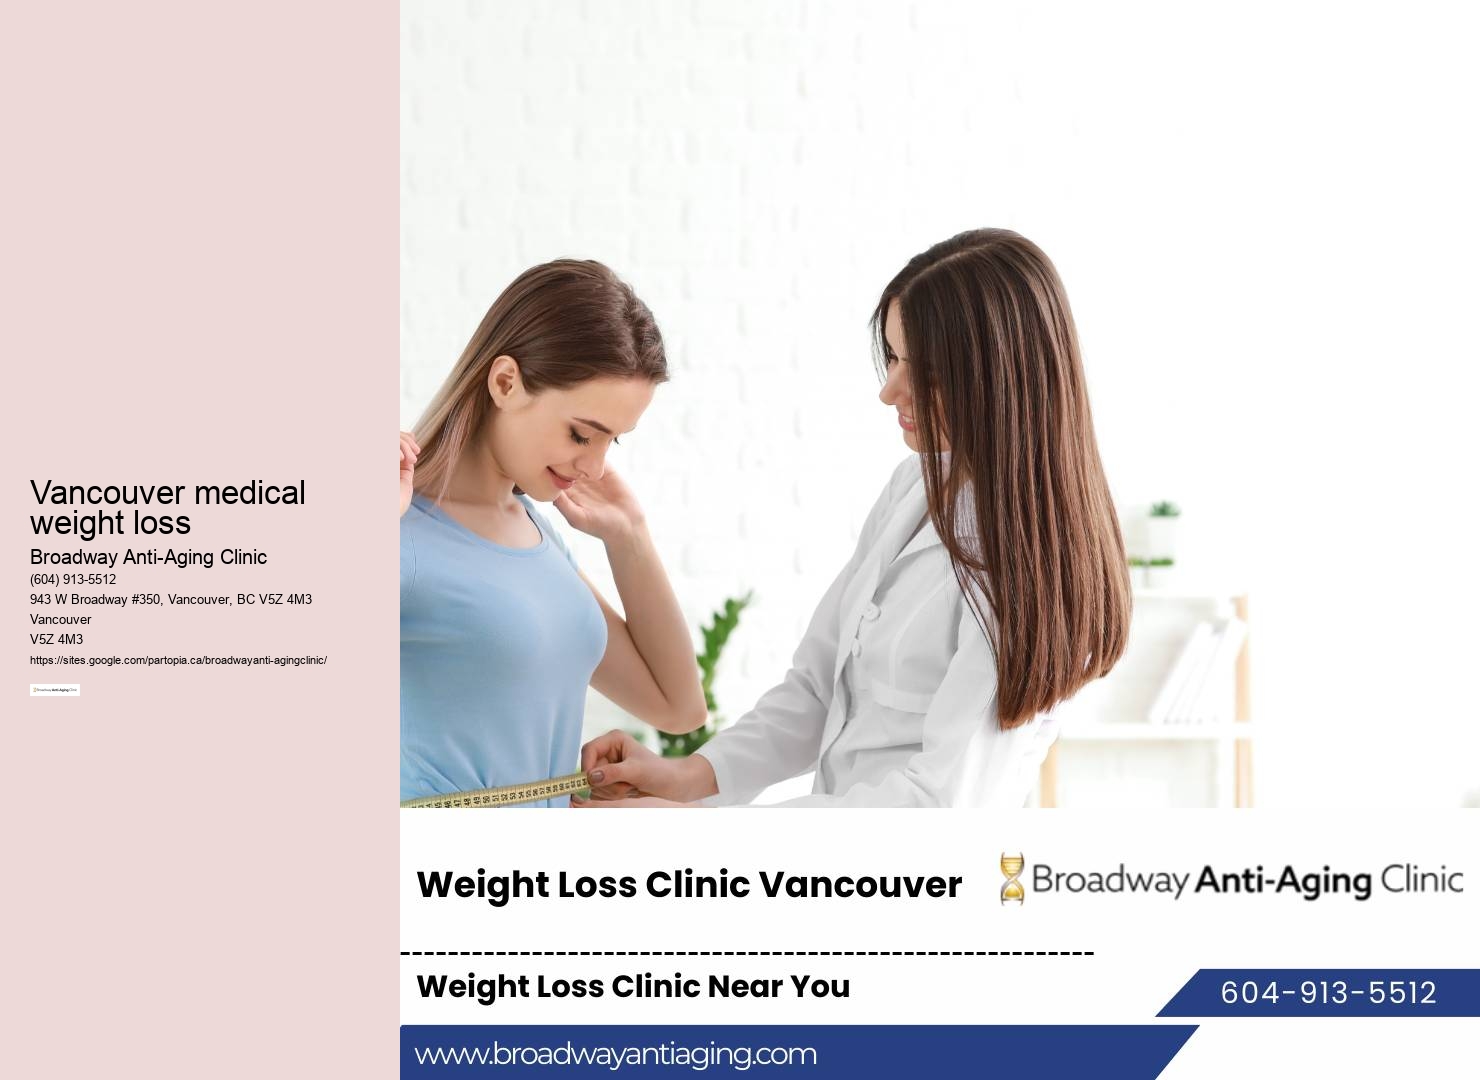 Vancouver medical weight loss